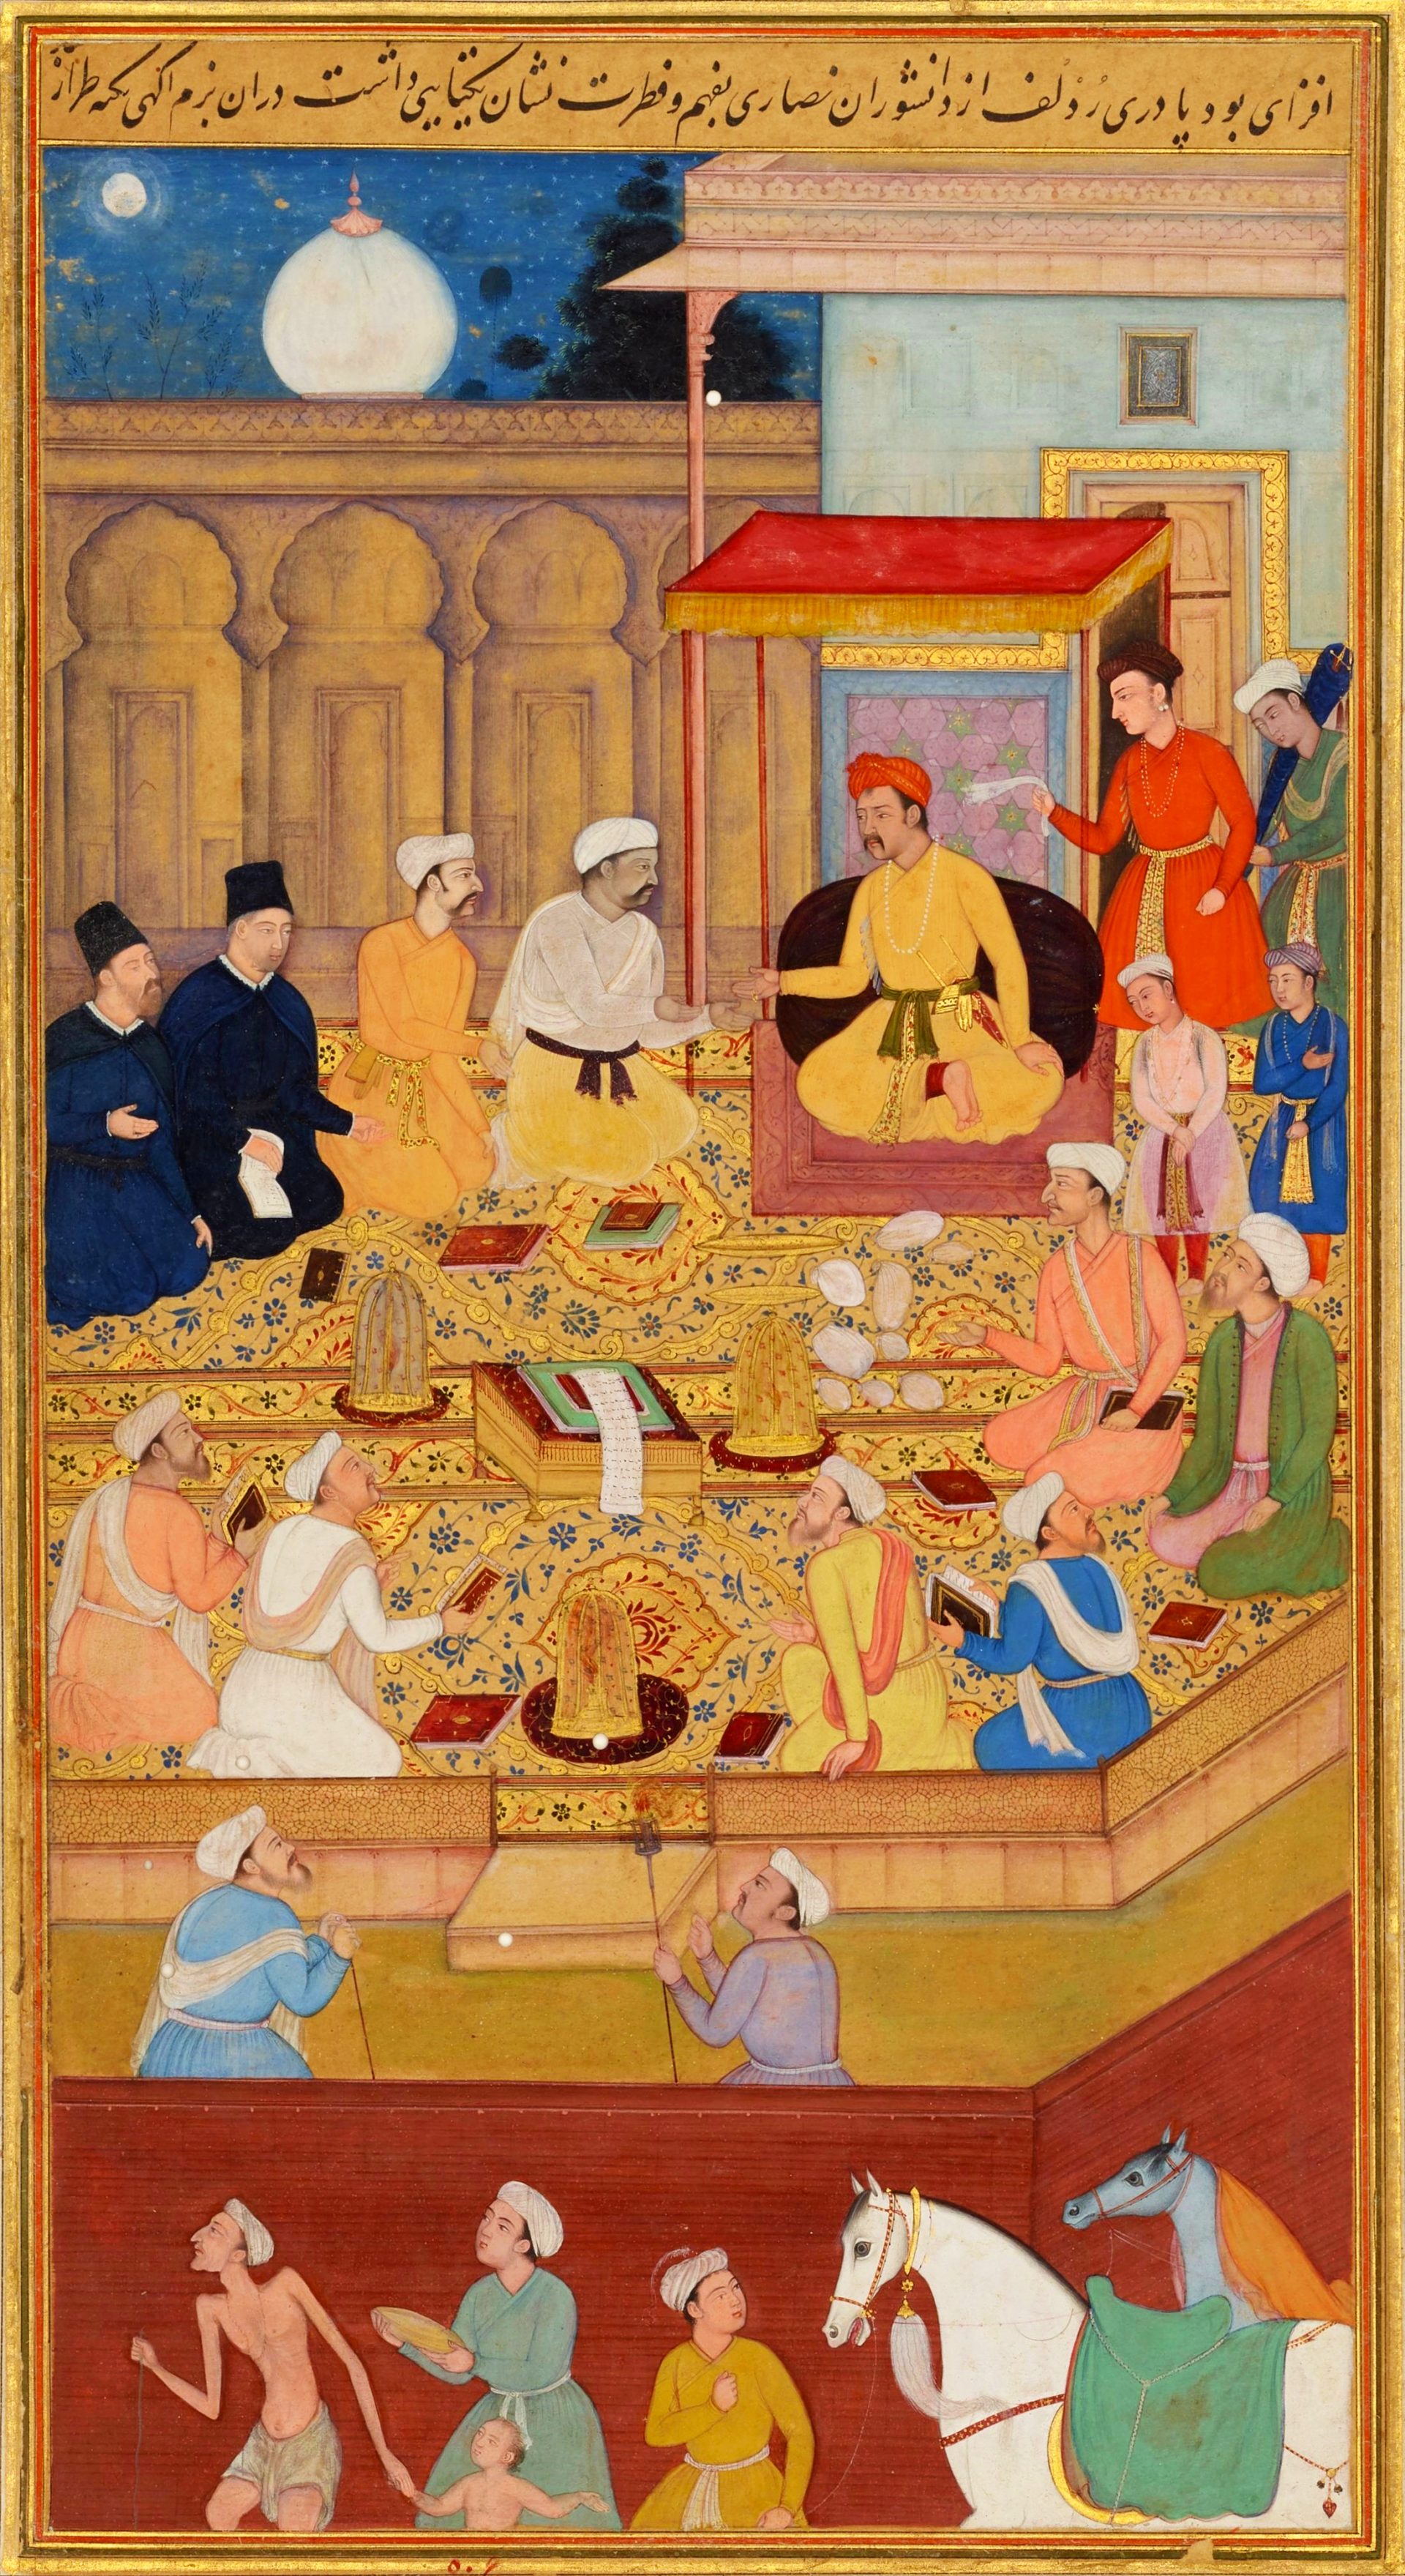 Illustration from the Akbarnama, circa 1605 CE, by Nar Singh, depicts Mughal Emperor Akbar in the Ibadat Khana (House of Worship) conducting a religious assembly. Jesuit missionaries Rudolfo Acquaviva and Francisco Henriques stand out in their black robes.